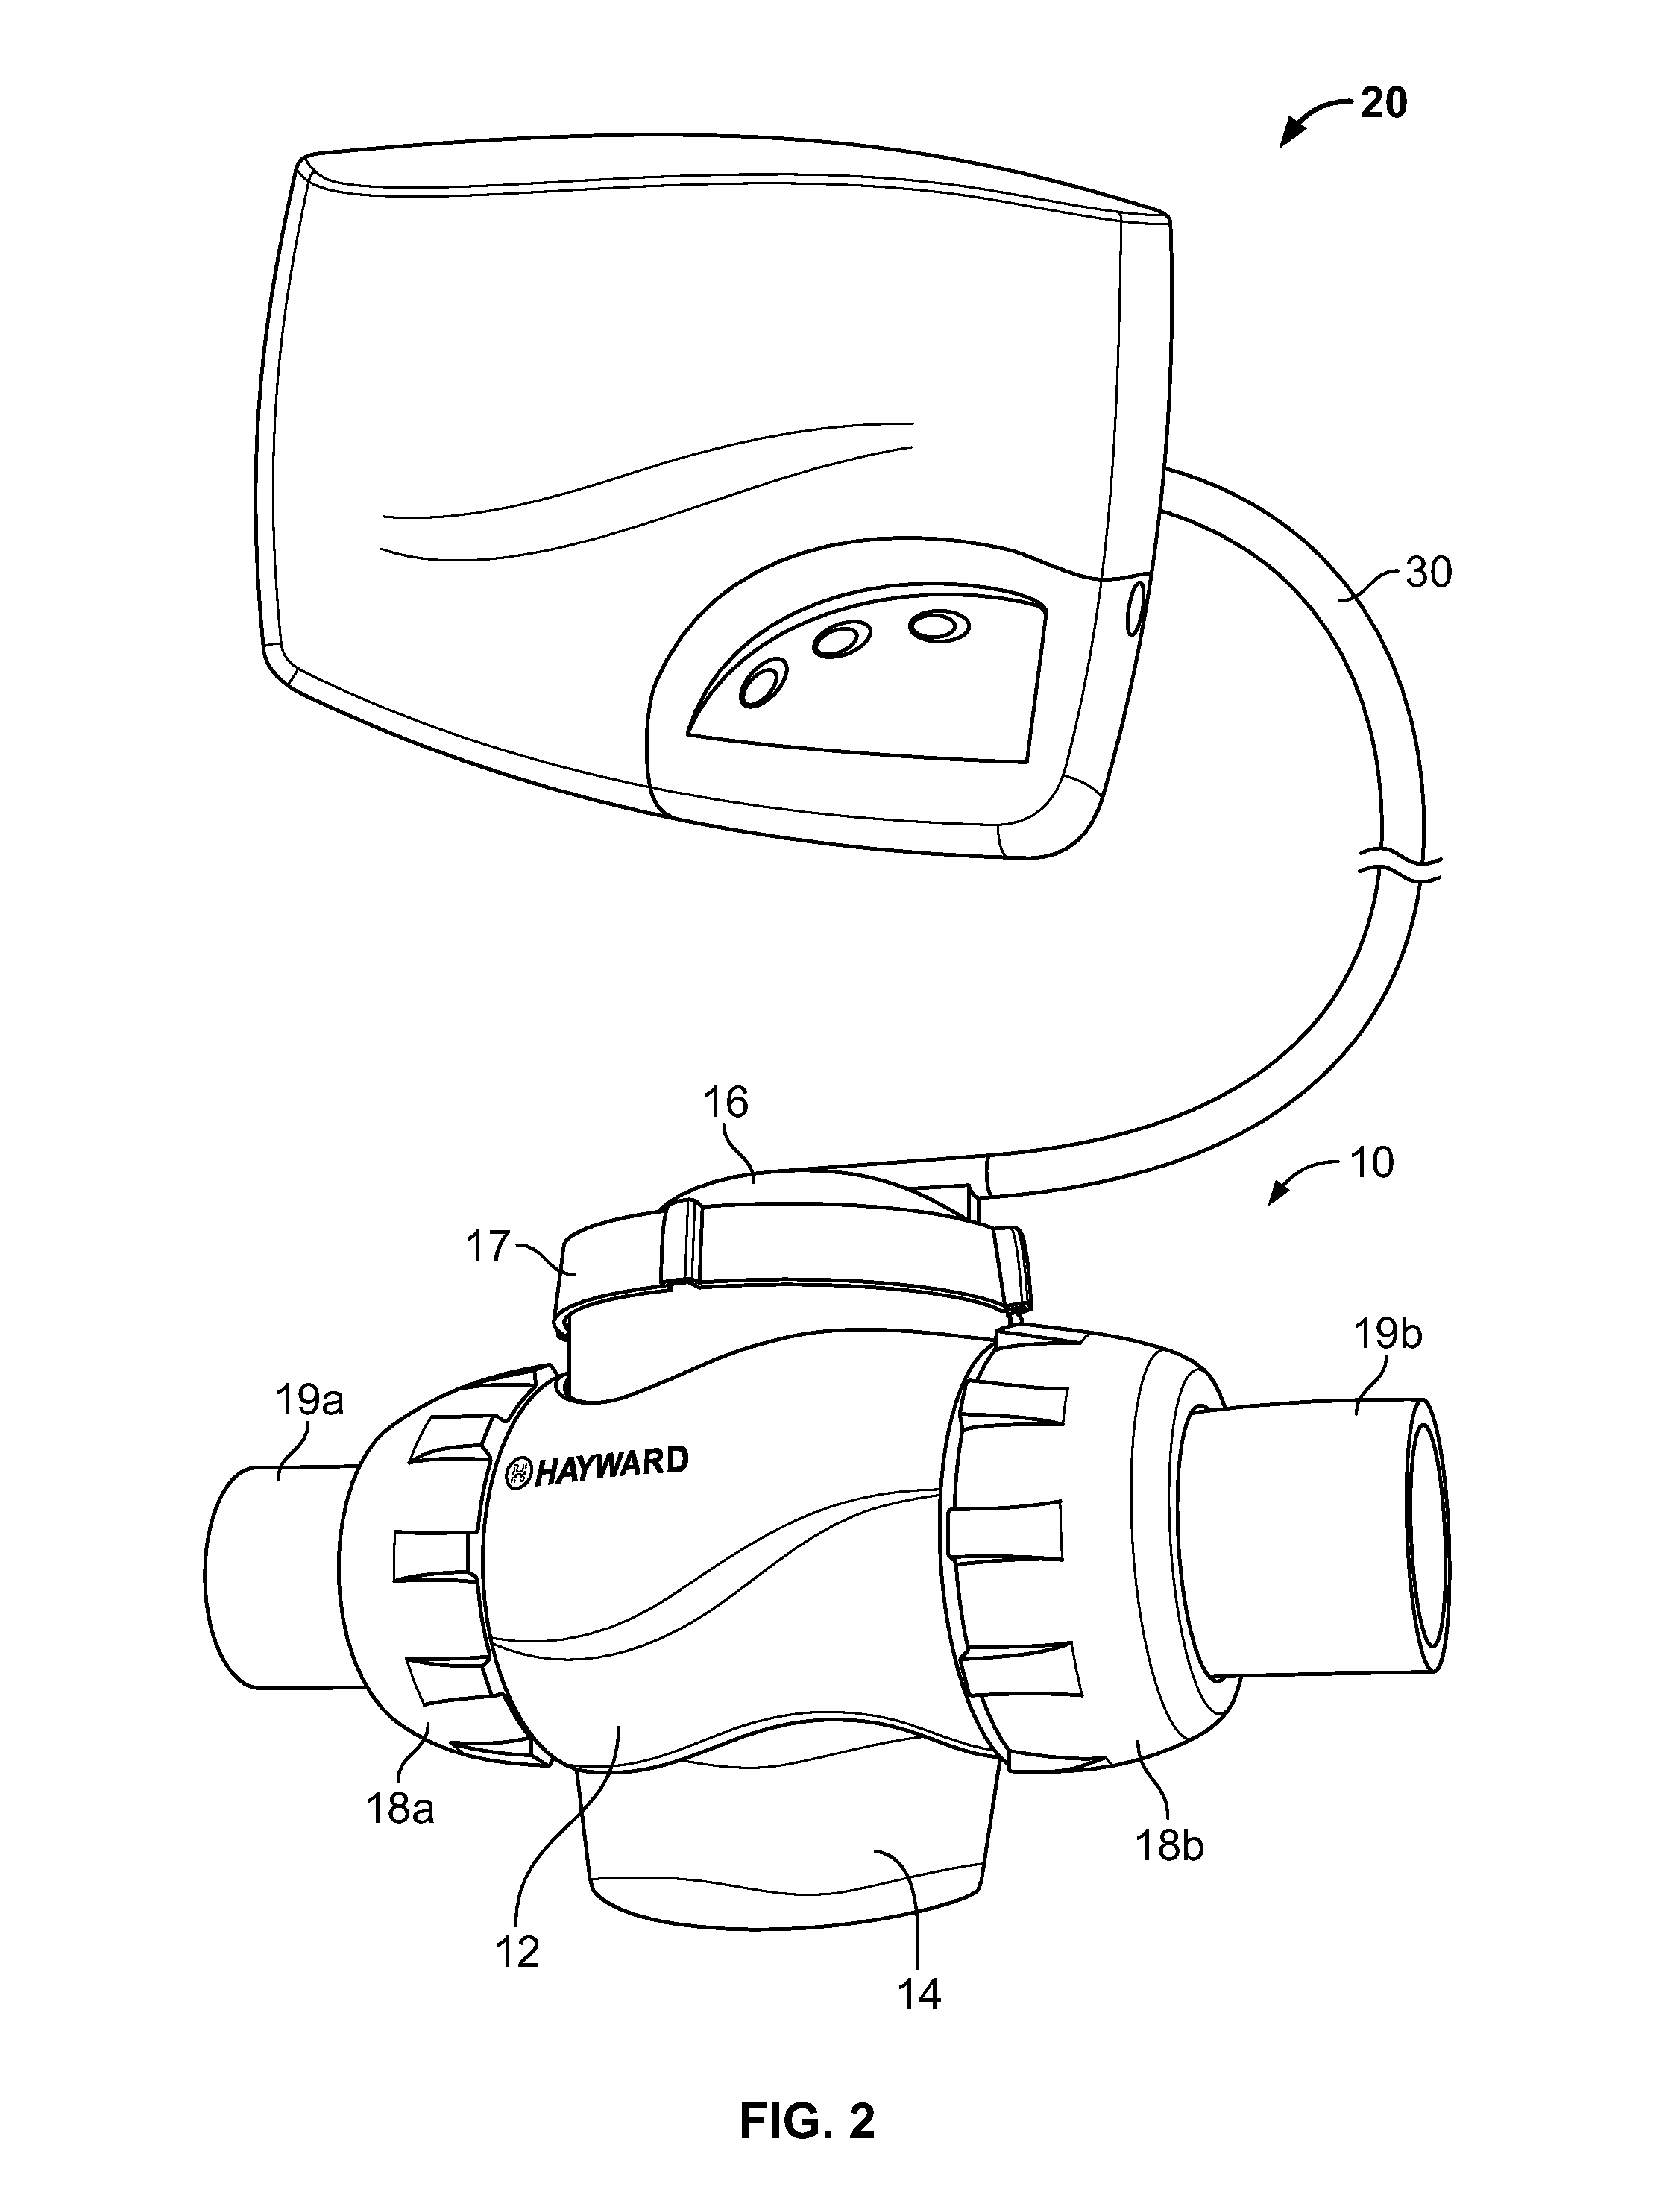 Systems and Methods for Interrelated Control of Chlorinators and Pumps